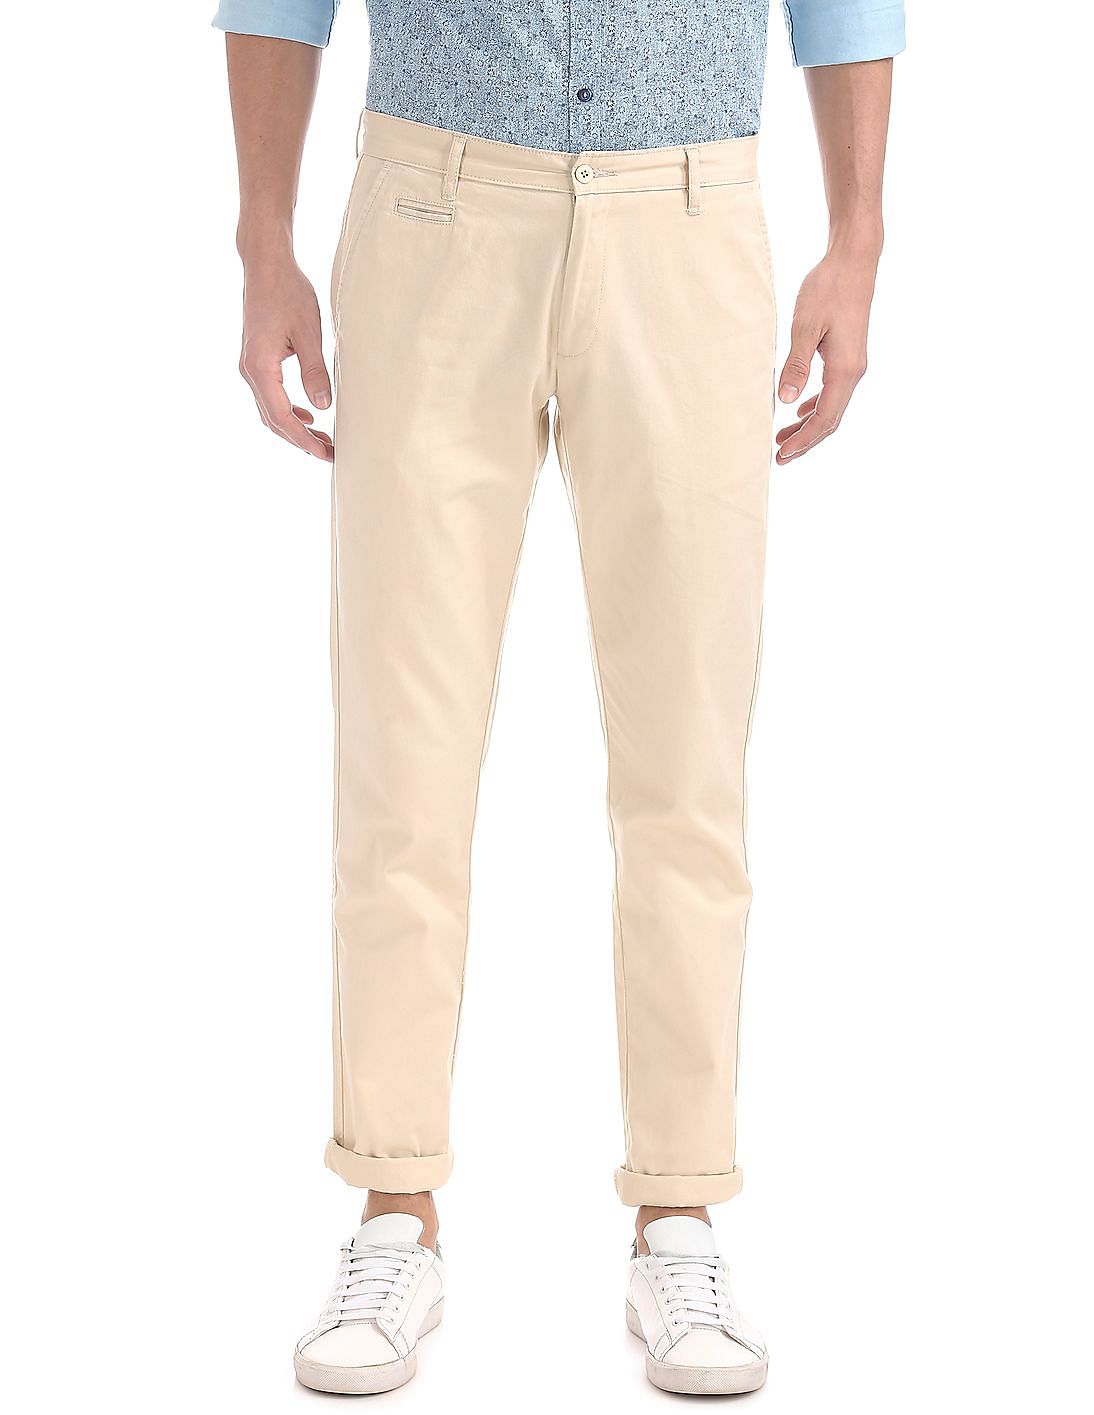 Buy Ruggers Modern Fit Flat Fit Trousers - NNNOW.com